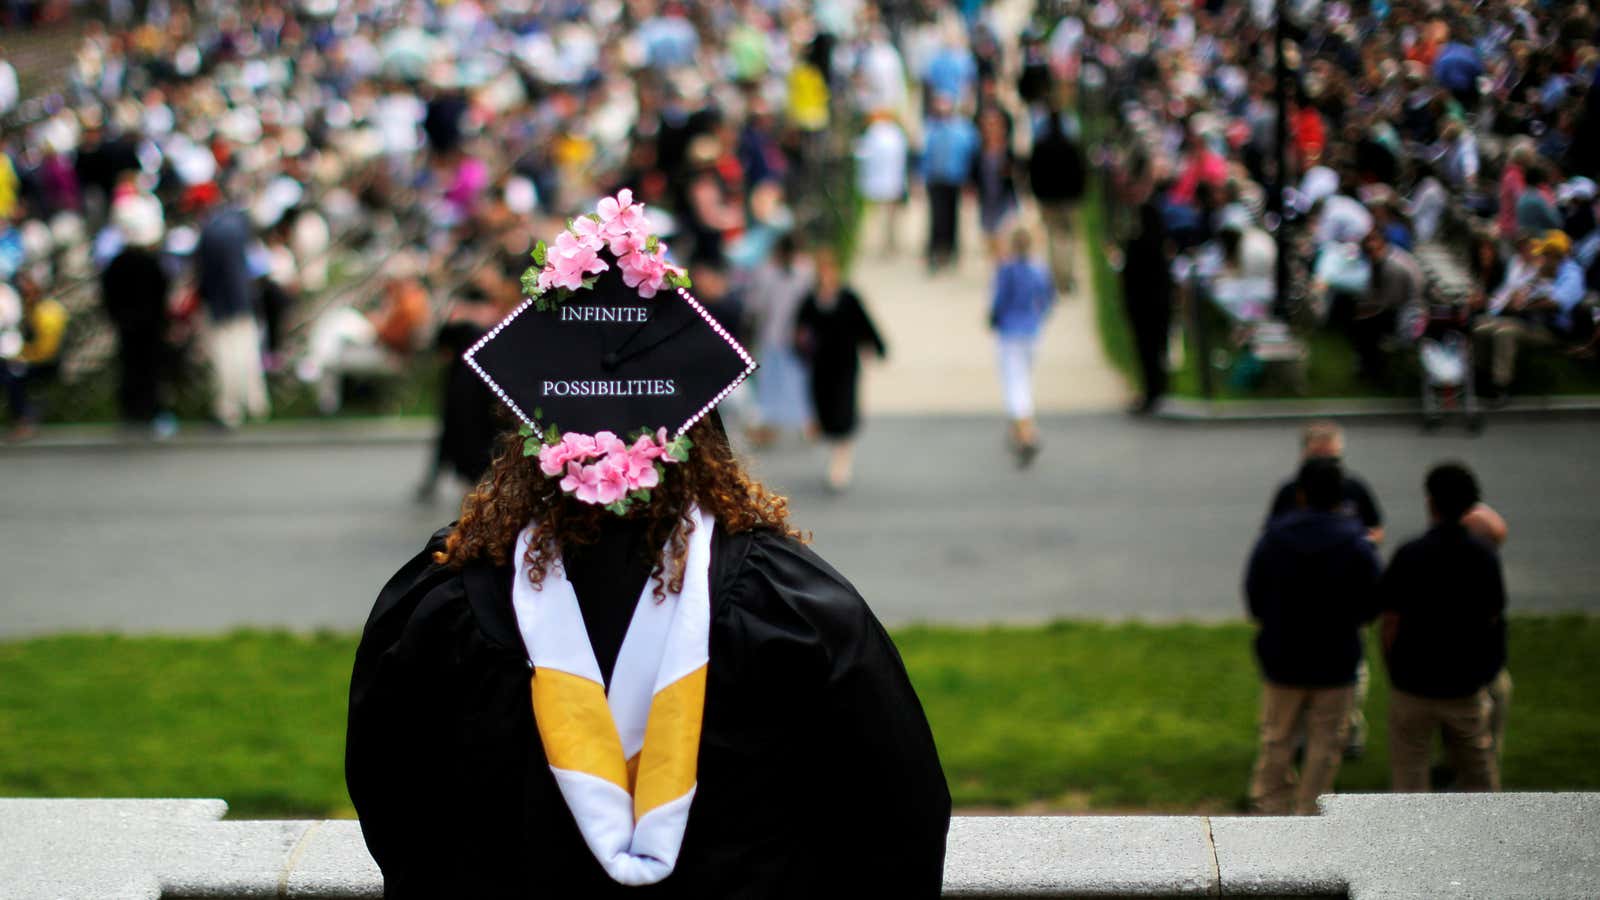 A senior with “Infinite Possibilities” written on her cap waits to graduate during Commencement at Smith College in Northampton, Massachusetts, U.S., May 21, 2017